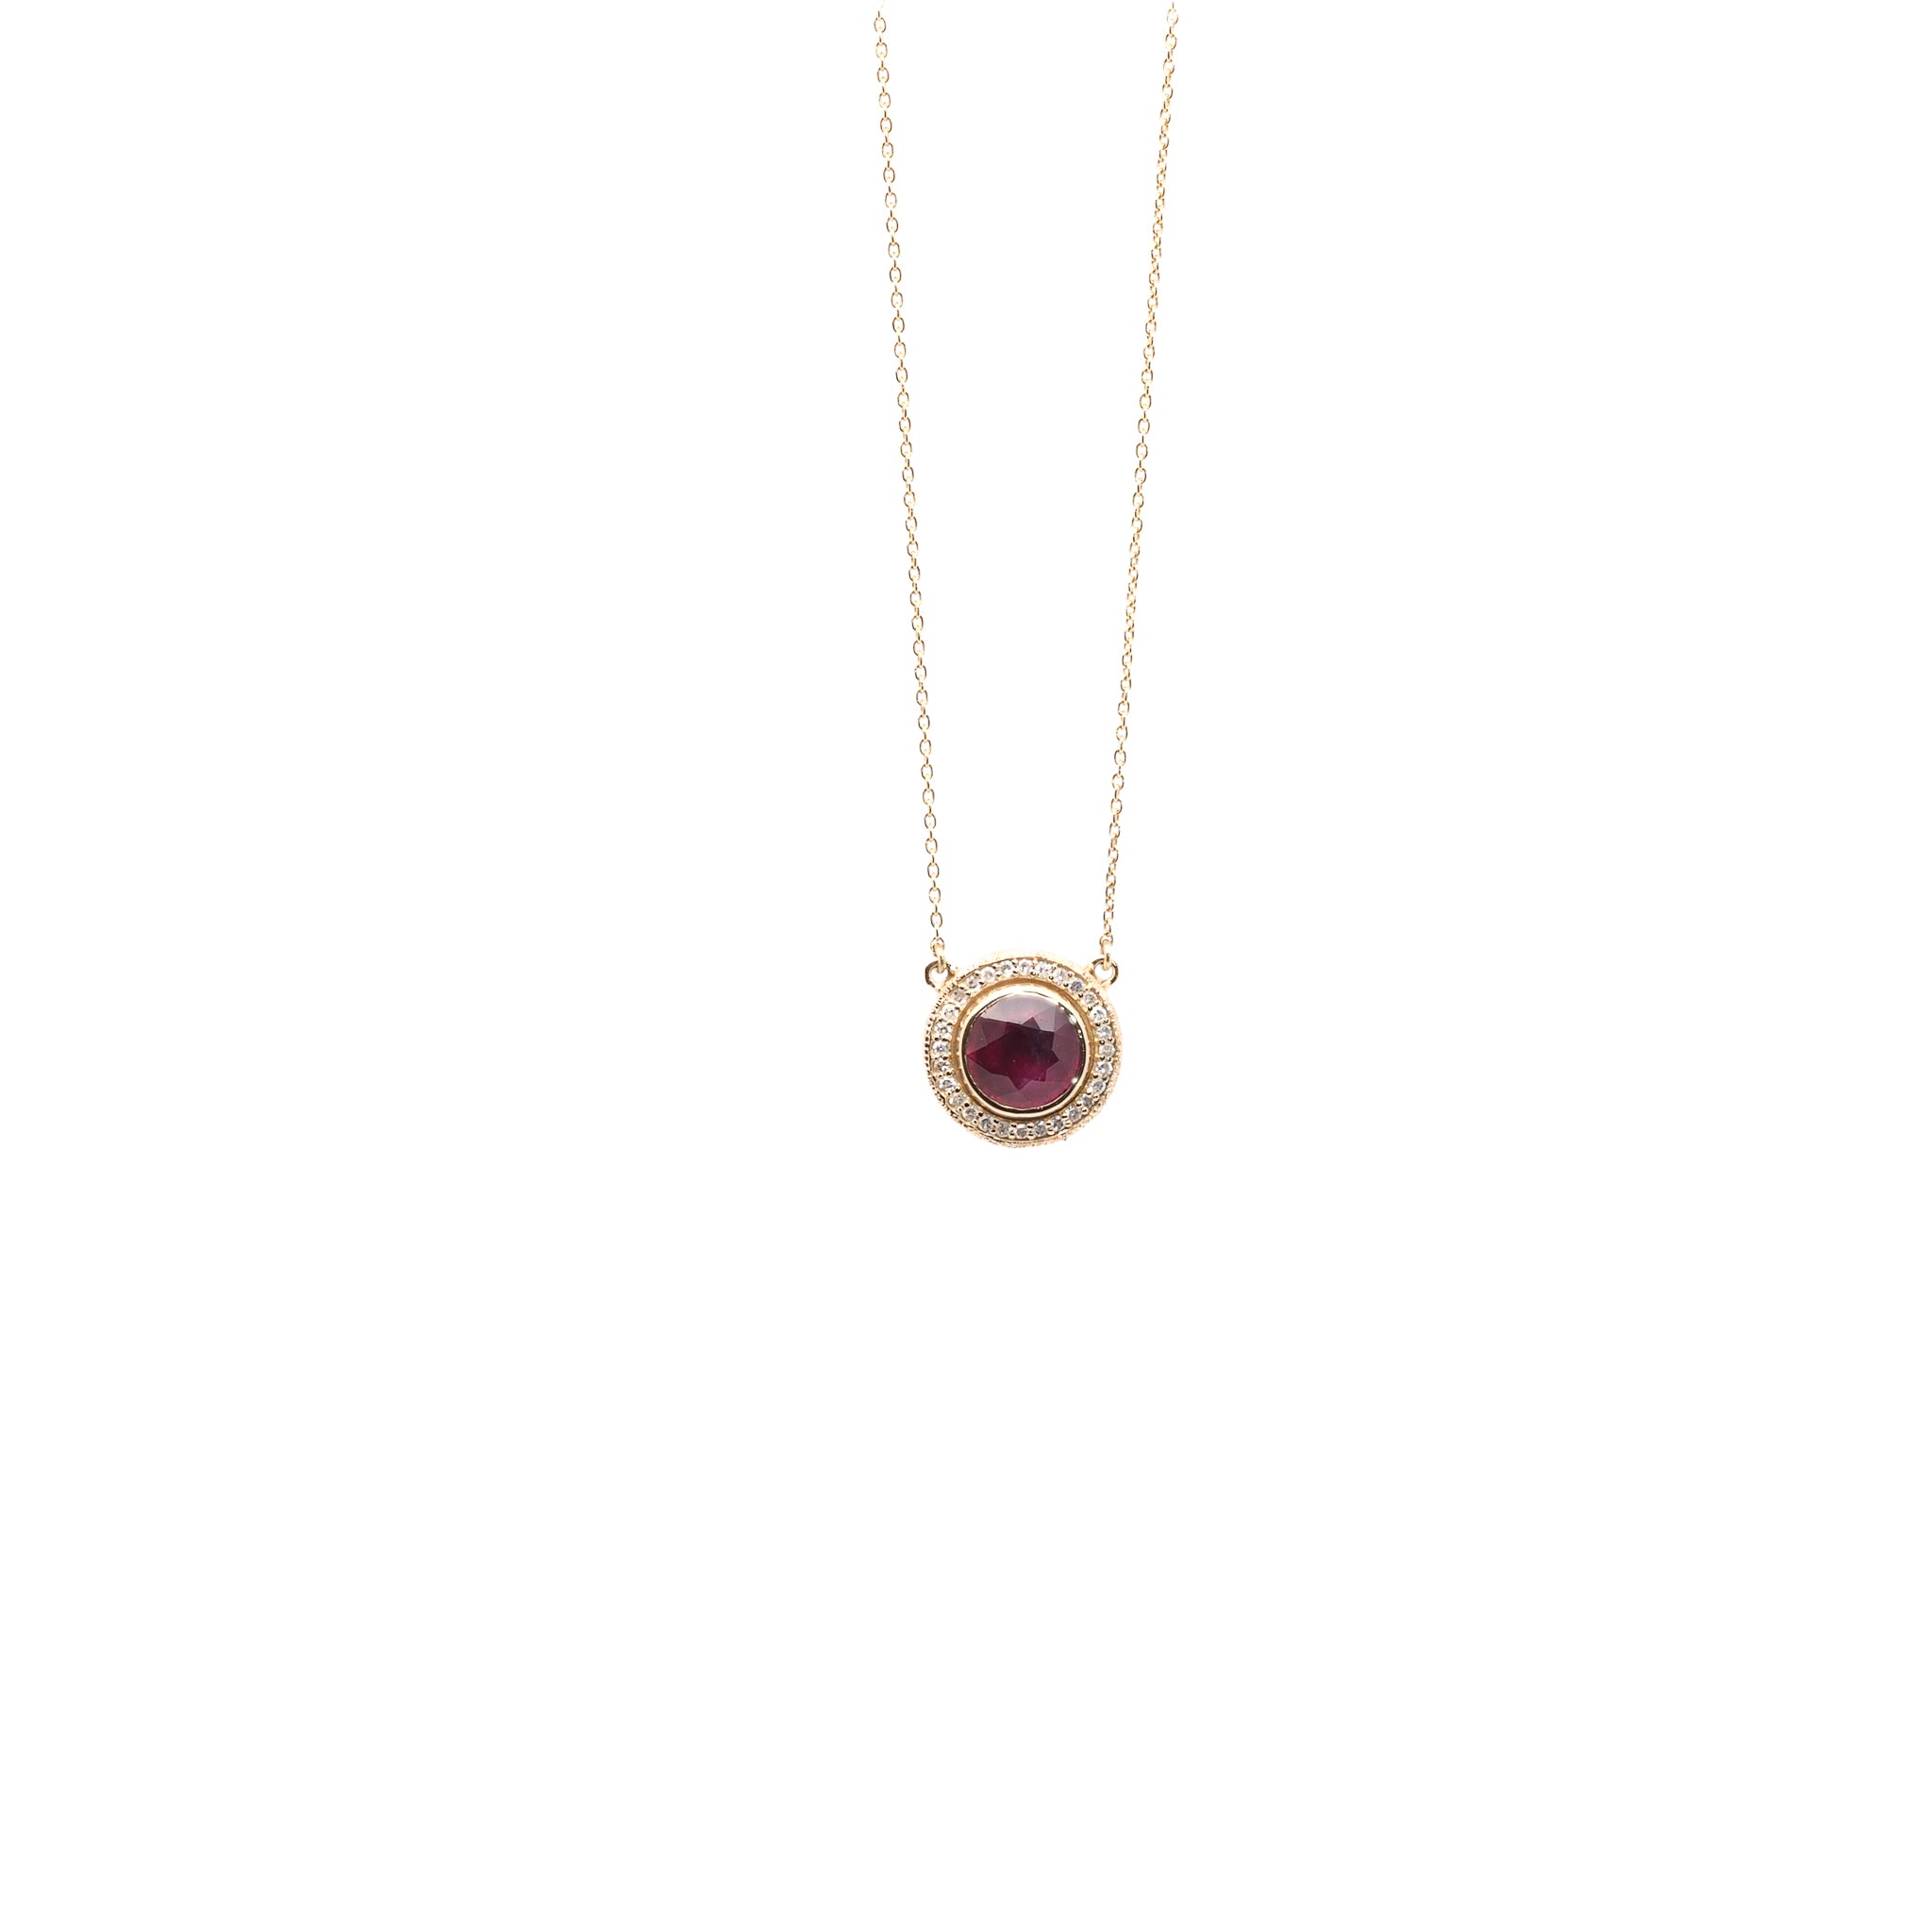 the Elegant Ruby & Diamond Necklace, highlighting the intricate details of the pendant and the delicate 18" gold chain.